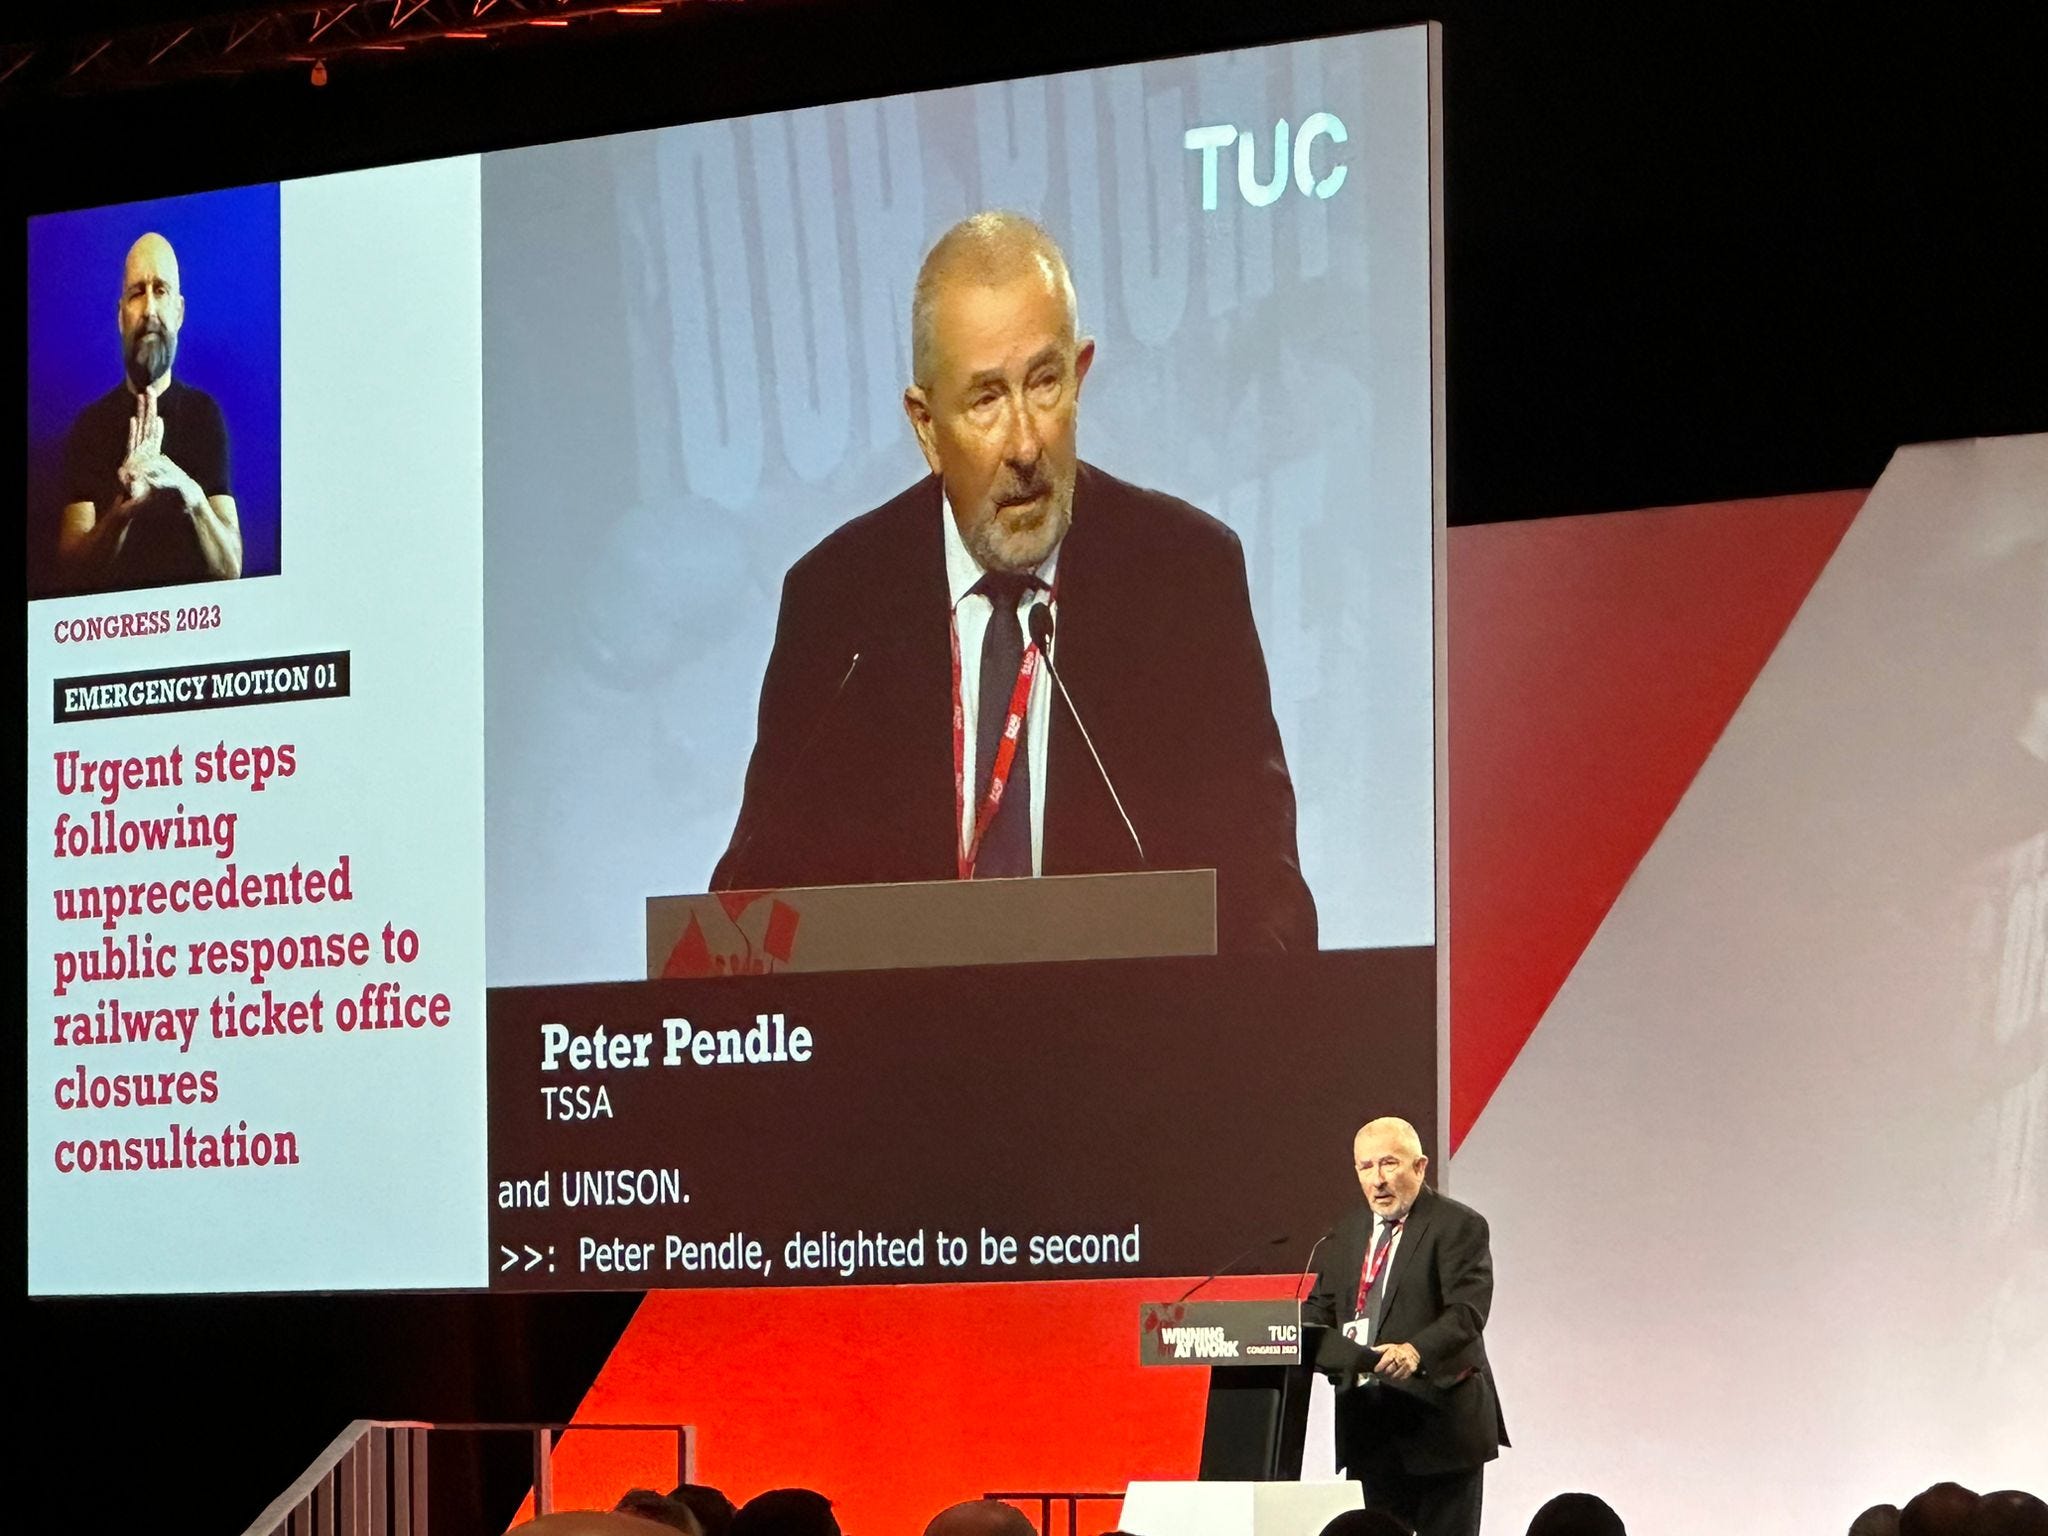 Peter Pendle, TSSA Interim General Secretary, addresses the TUC. Peter is shown standing behind a lectern in front of a larger image showing Peter and a sign language translator. 